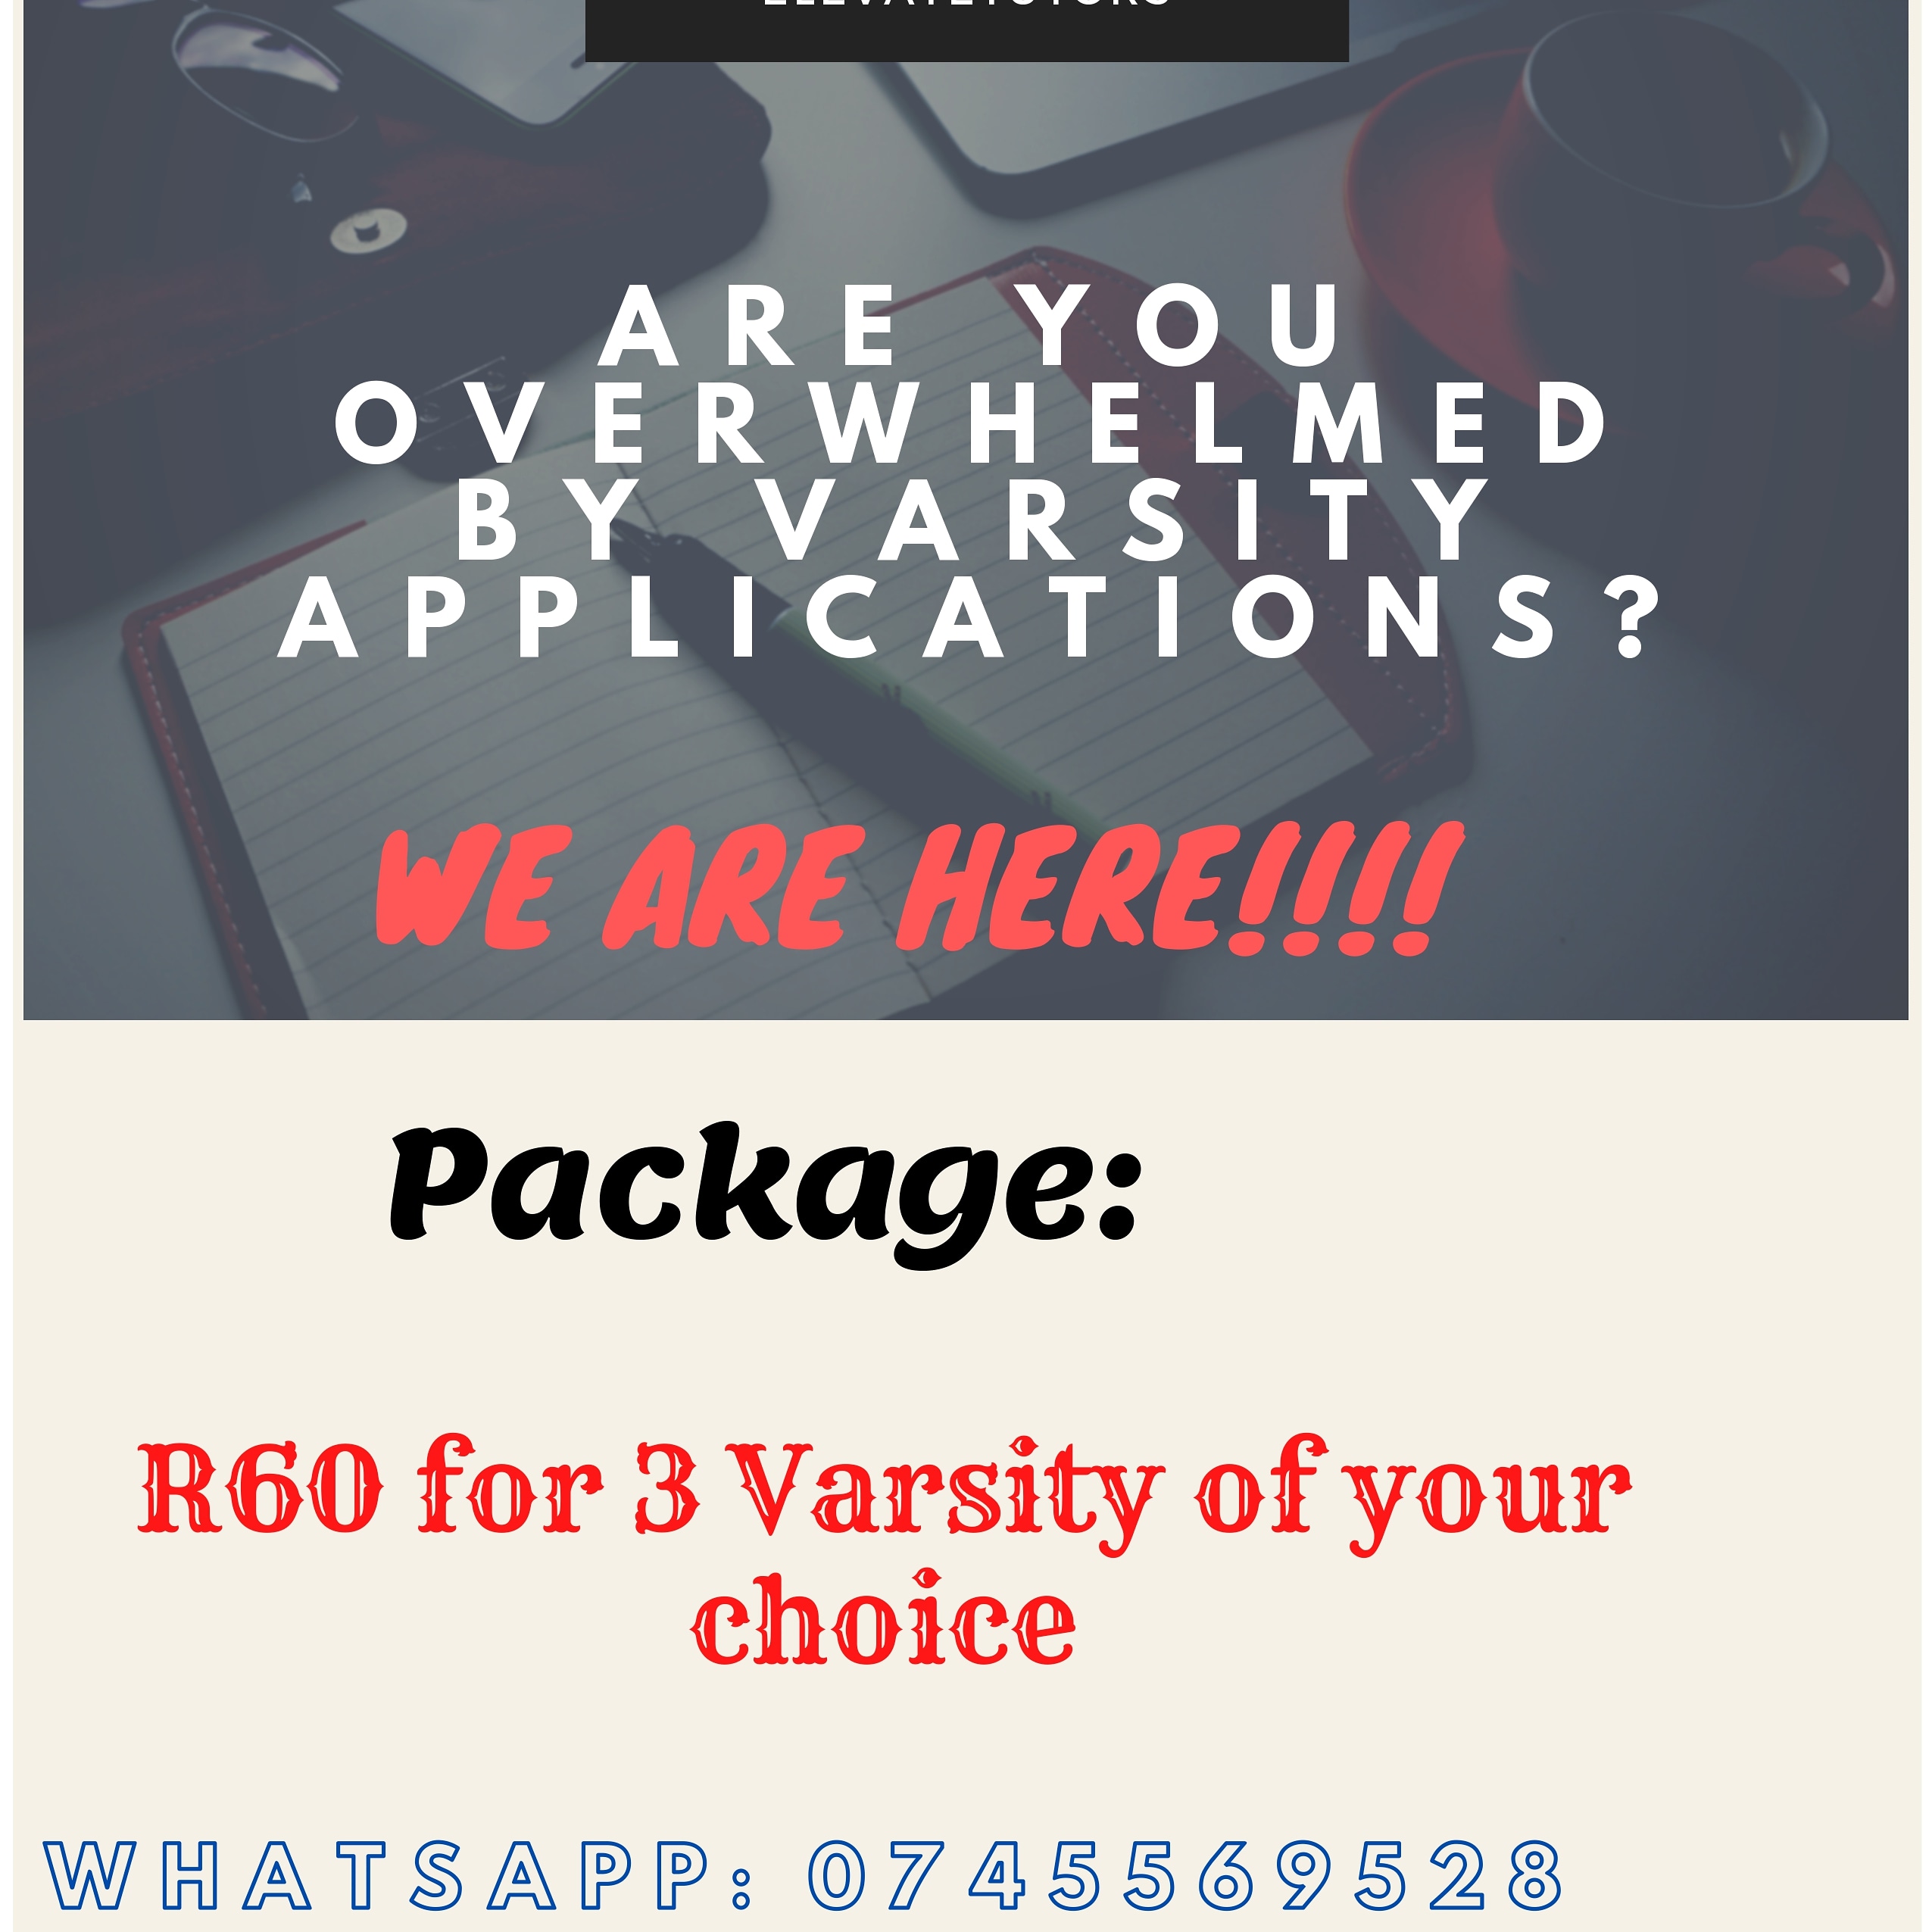 We can save you time by applying for you at south African institutions of your choice. Fill the google form here: https://docs.google.com/forms/d/e/1FAIpQLSc0t1y-9hqv2PrABpjdgq0p29jhxpu5poQH6xj8oHrO5gJ34A/viewform?vc=0&c=0&w=1&flr=0